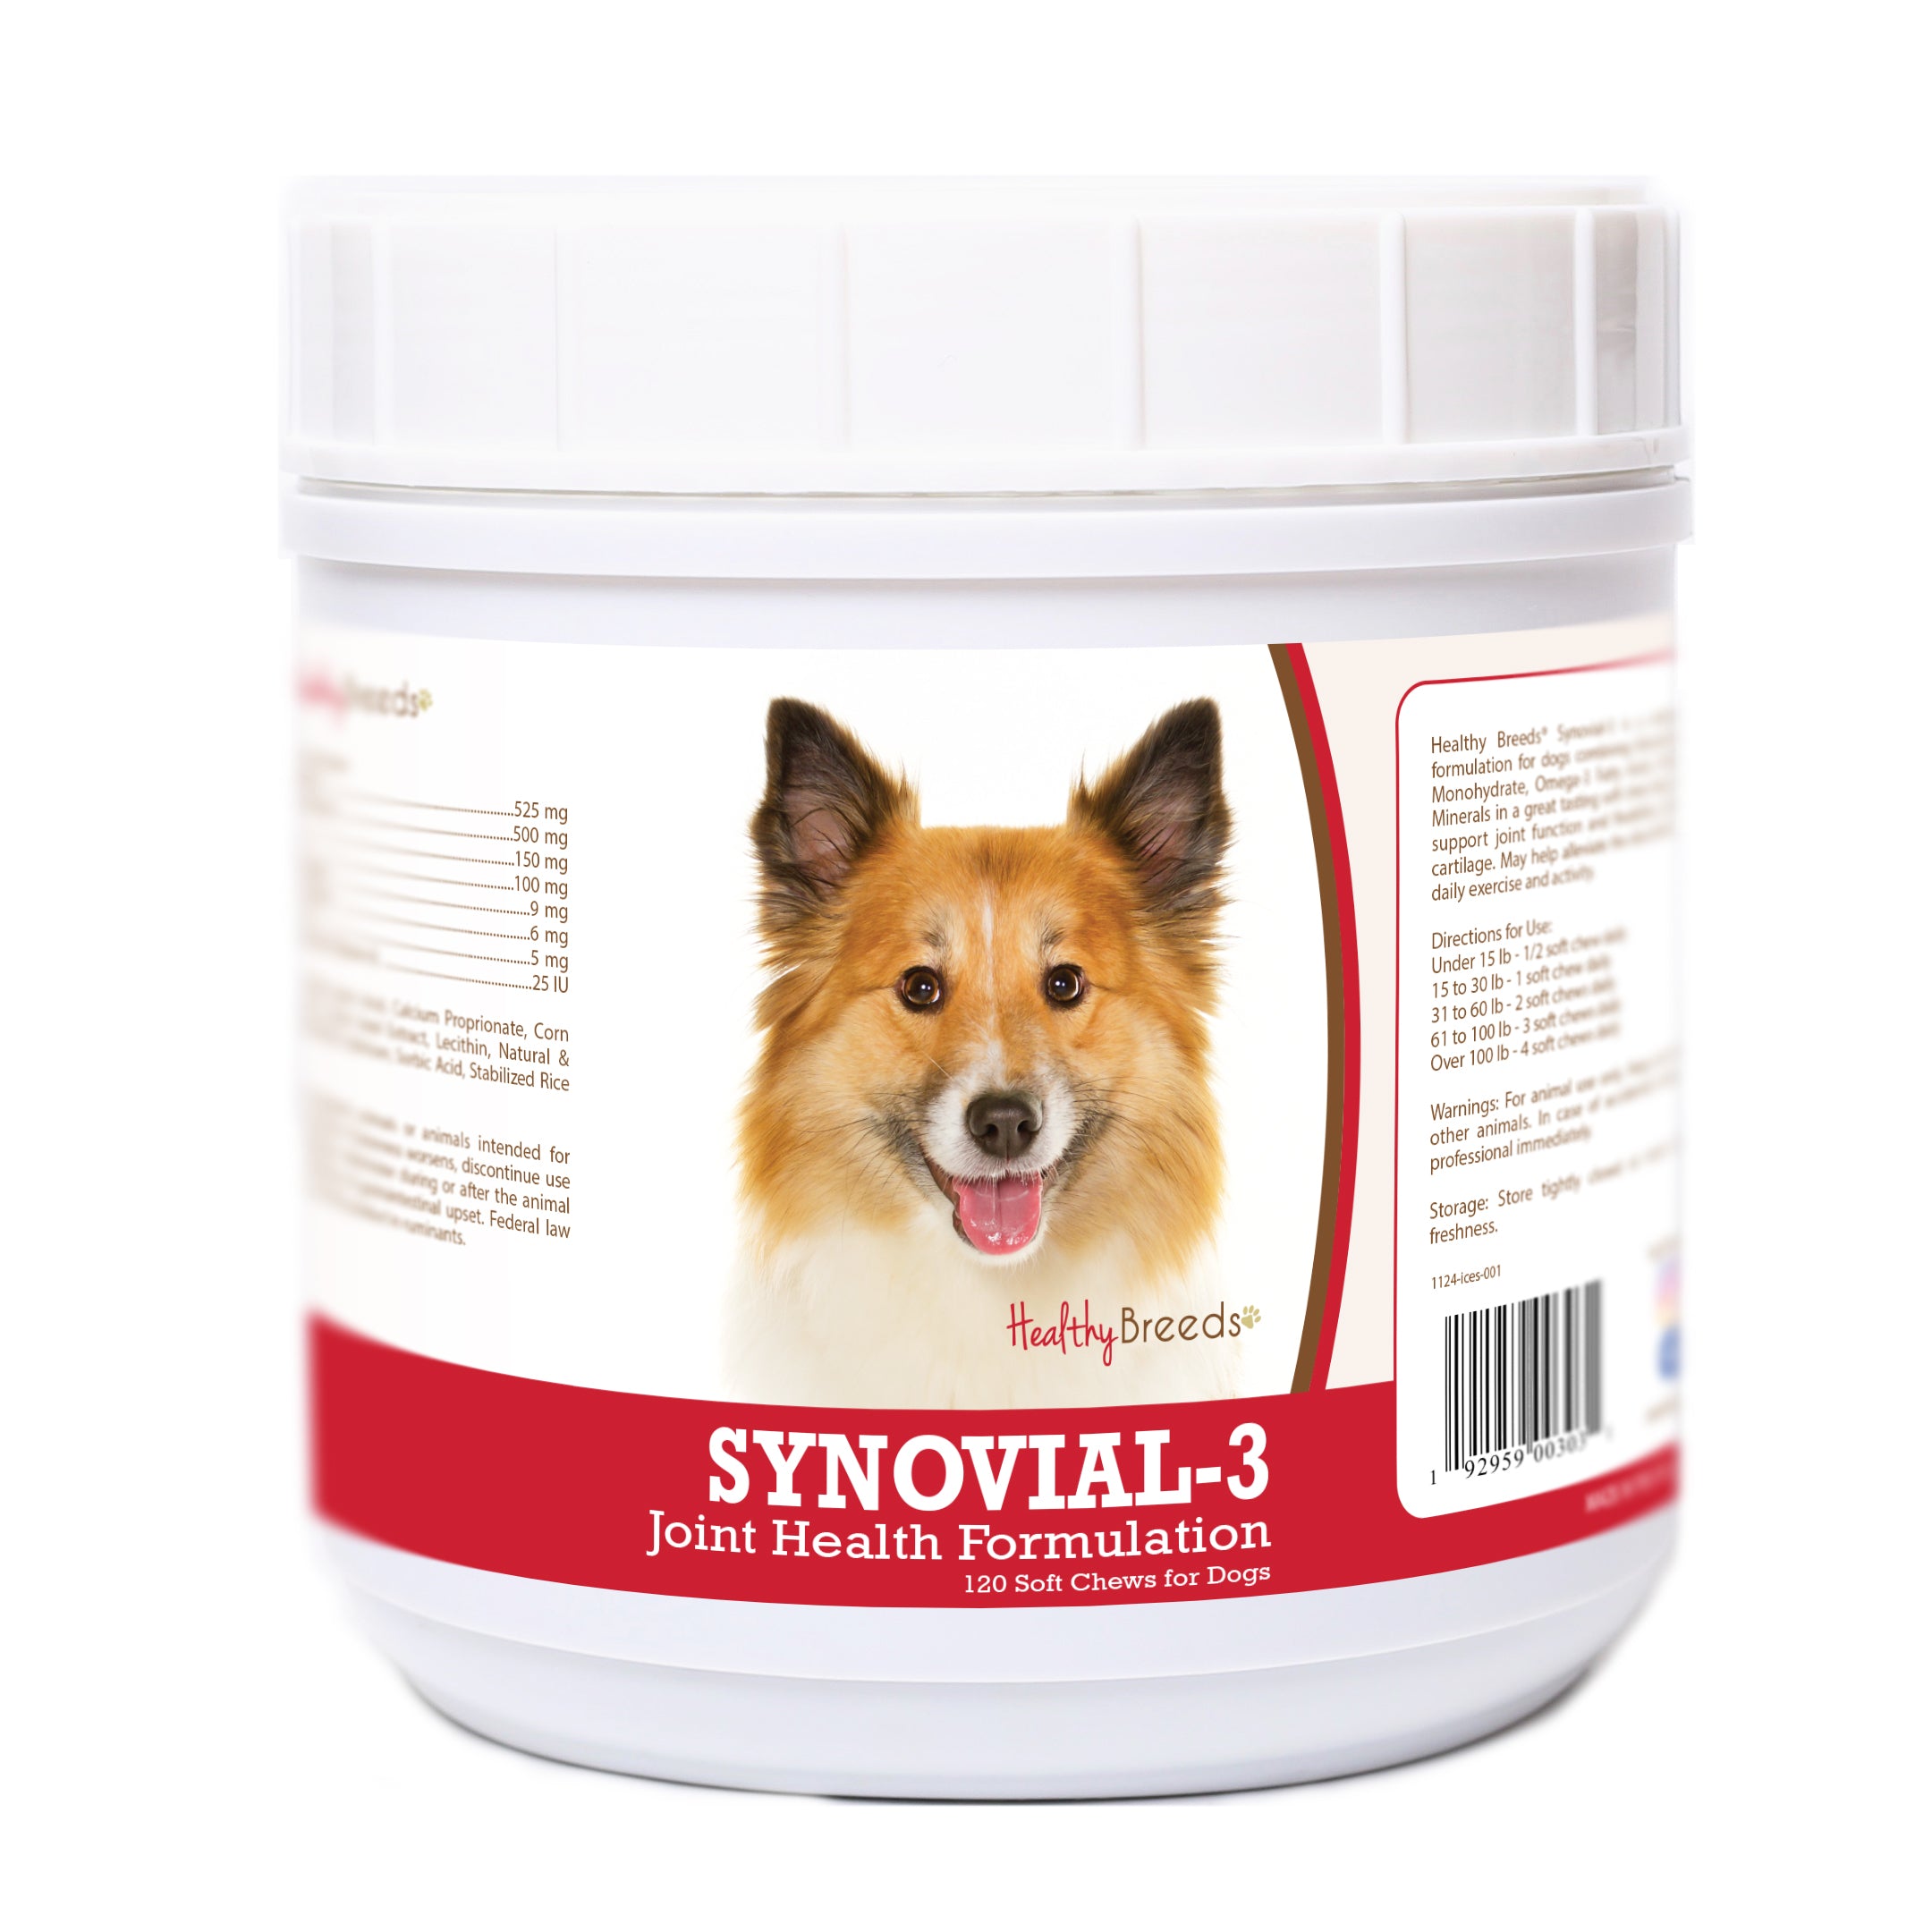 Icelandic Sheepdog Synovial-3 Joint Health Formulation Soft Chews 120 Count